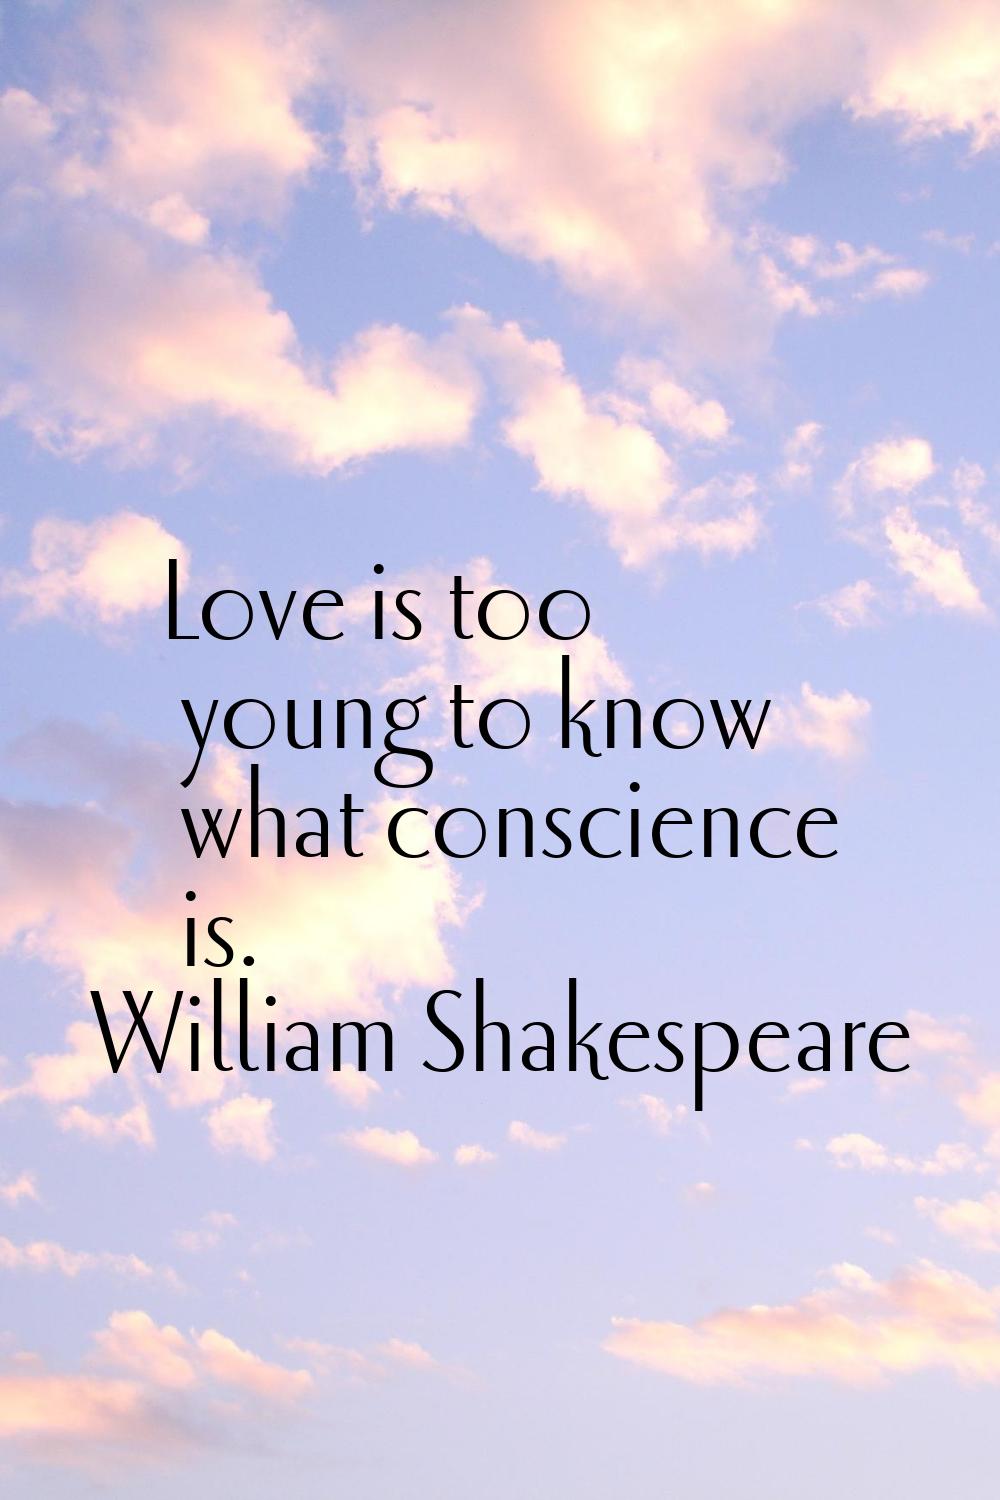 Love is too young to know what conscience is.